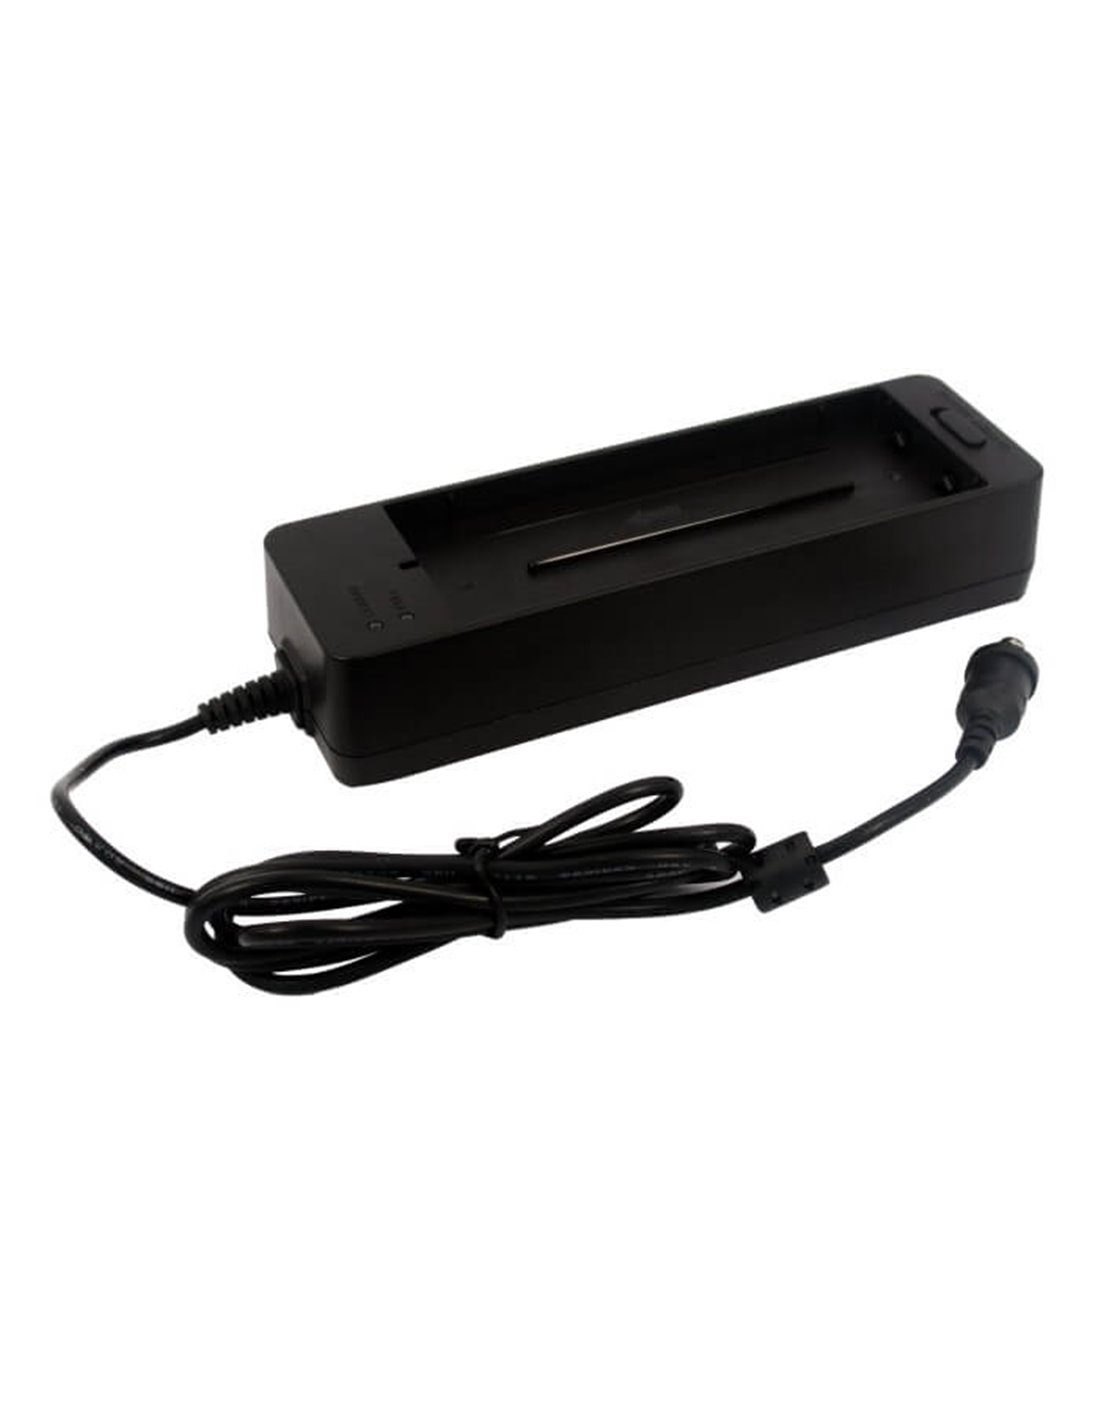 Canon Sephy Cp810, Sephy Cp-810 Printer Charger